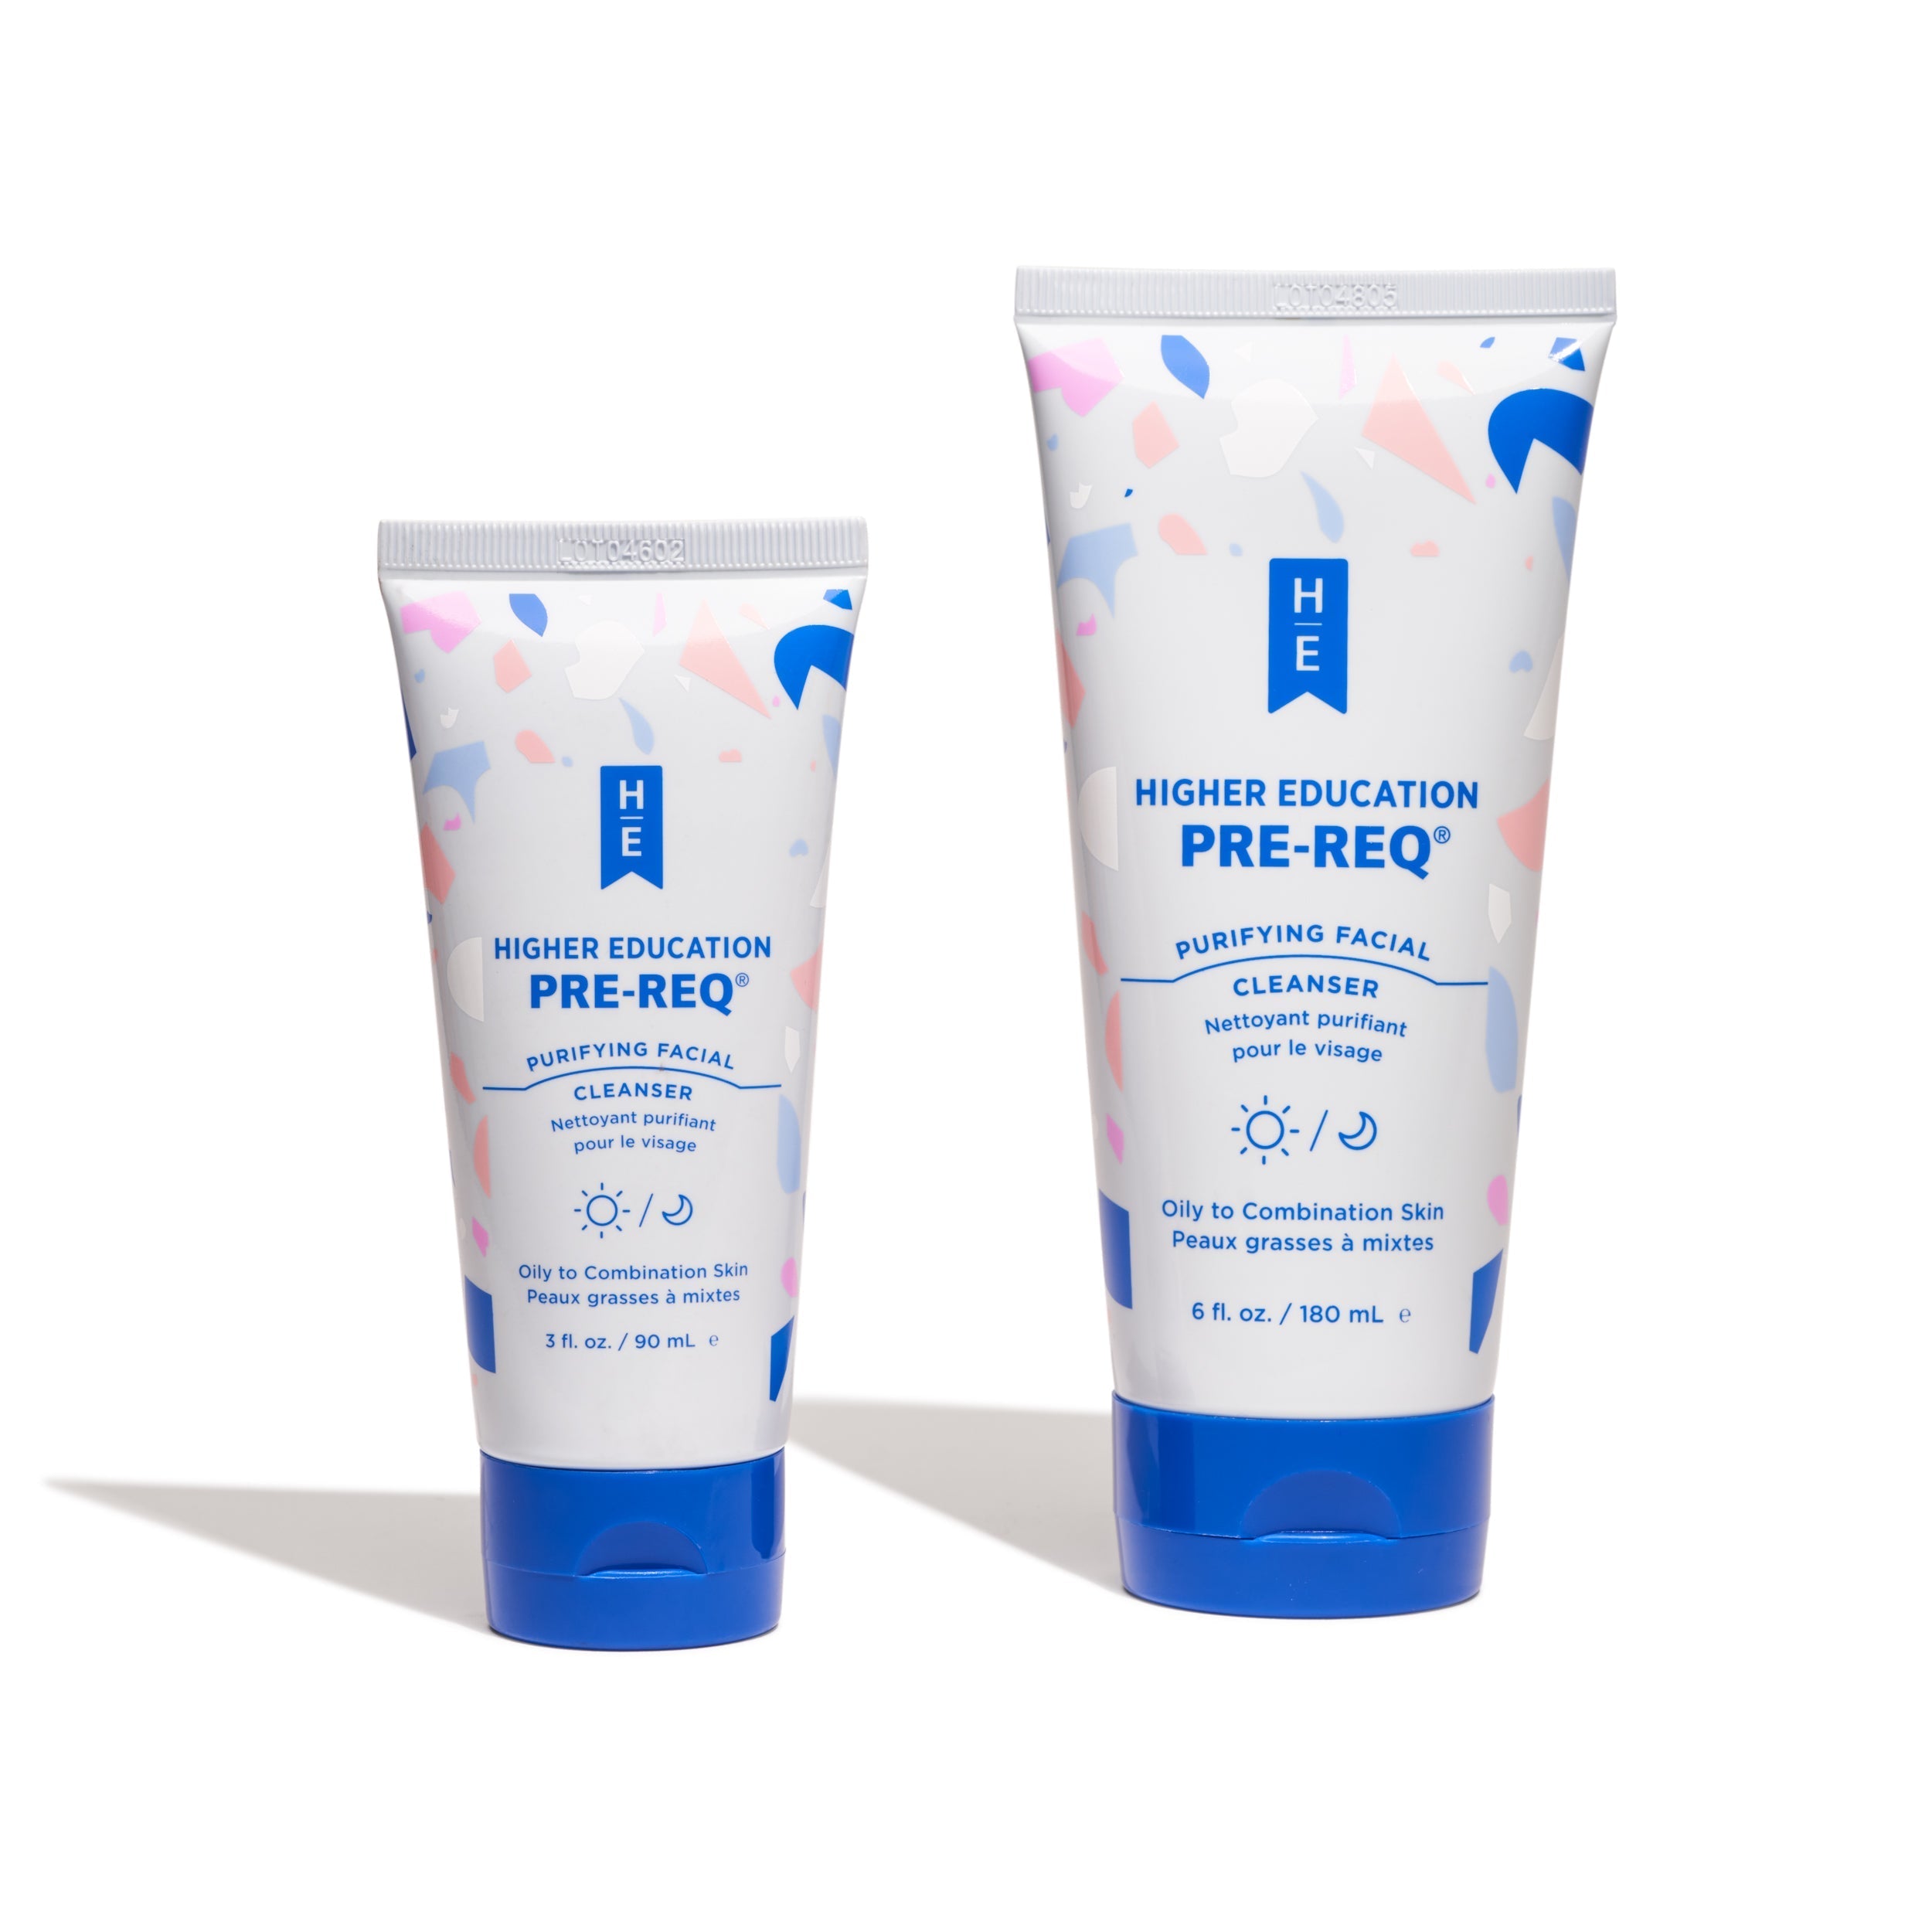 HIGHER EDUCATION PRE-REQ® Purifying Facial Cleanser Travel Size